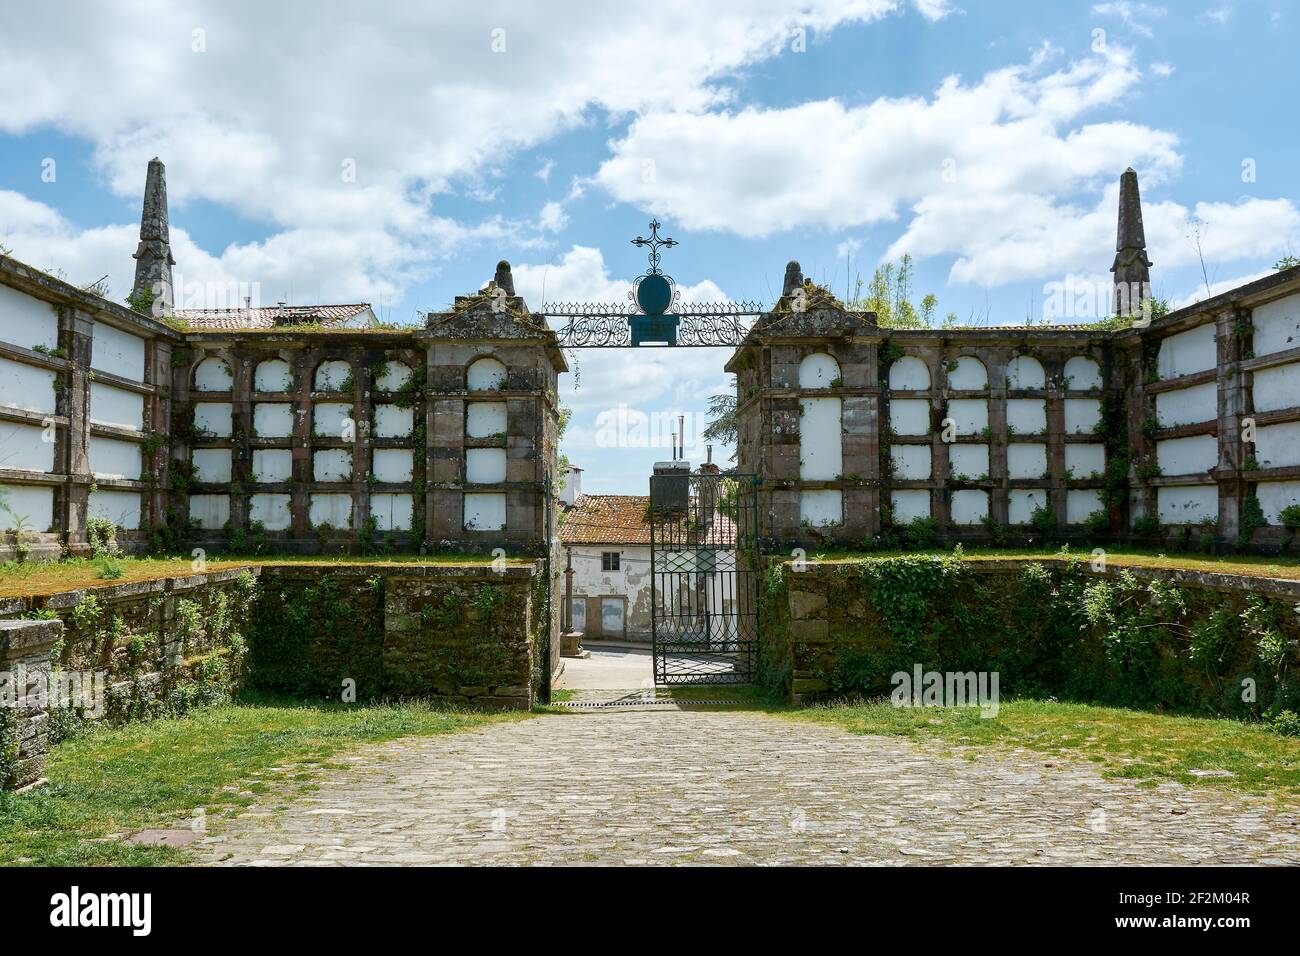 MAY 3, 2018 - GALICIA, SPAIN: View of old tombs at the entrance of the cemetery at the Park of San Domingos de Bonaval in Santiago de Compostela. Stock Photo